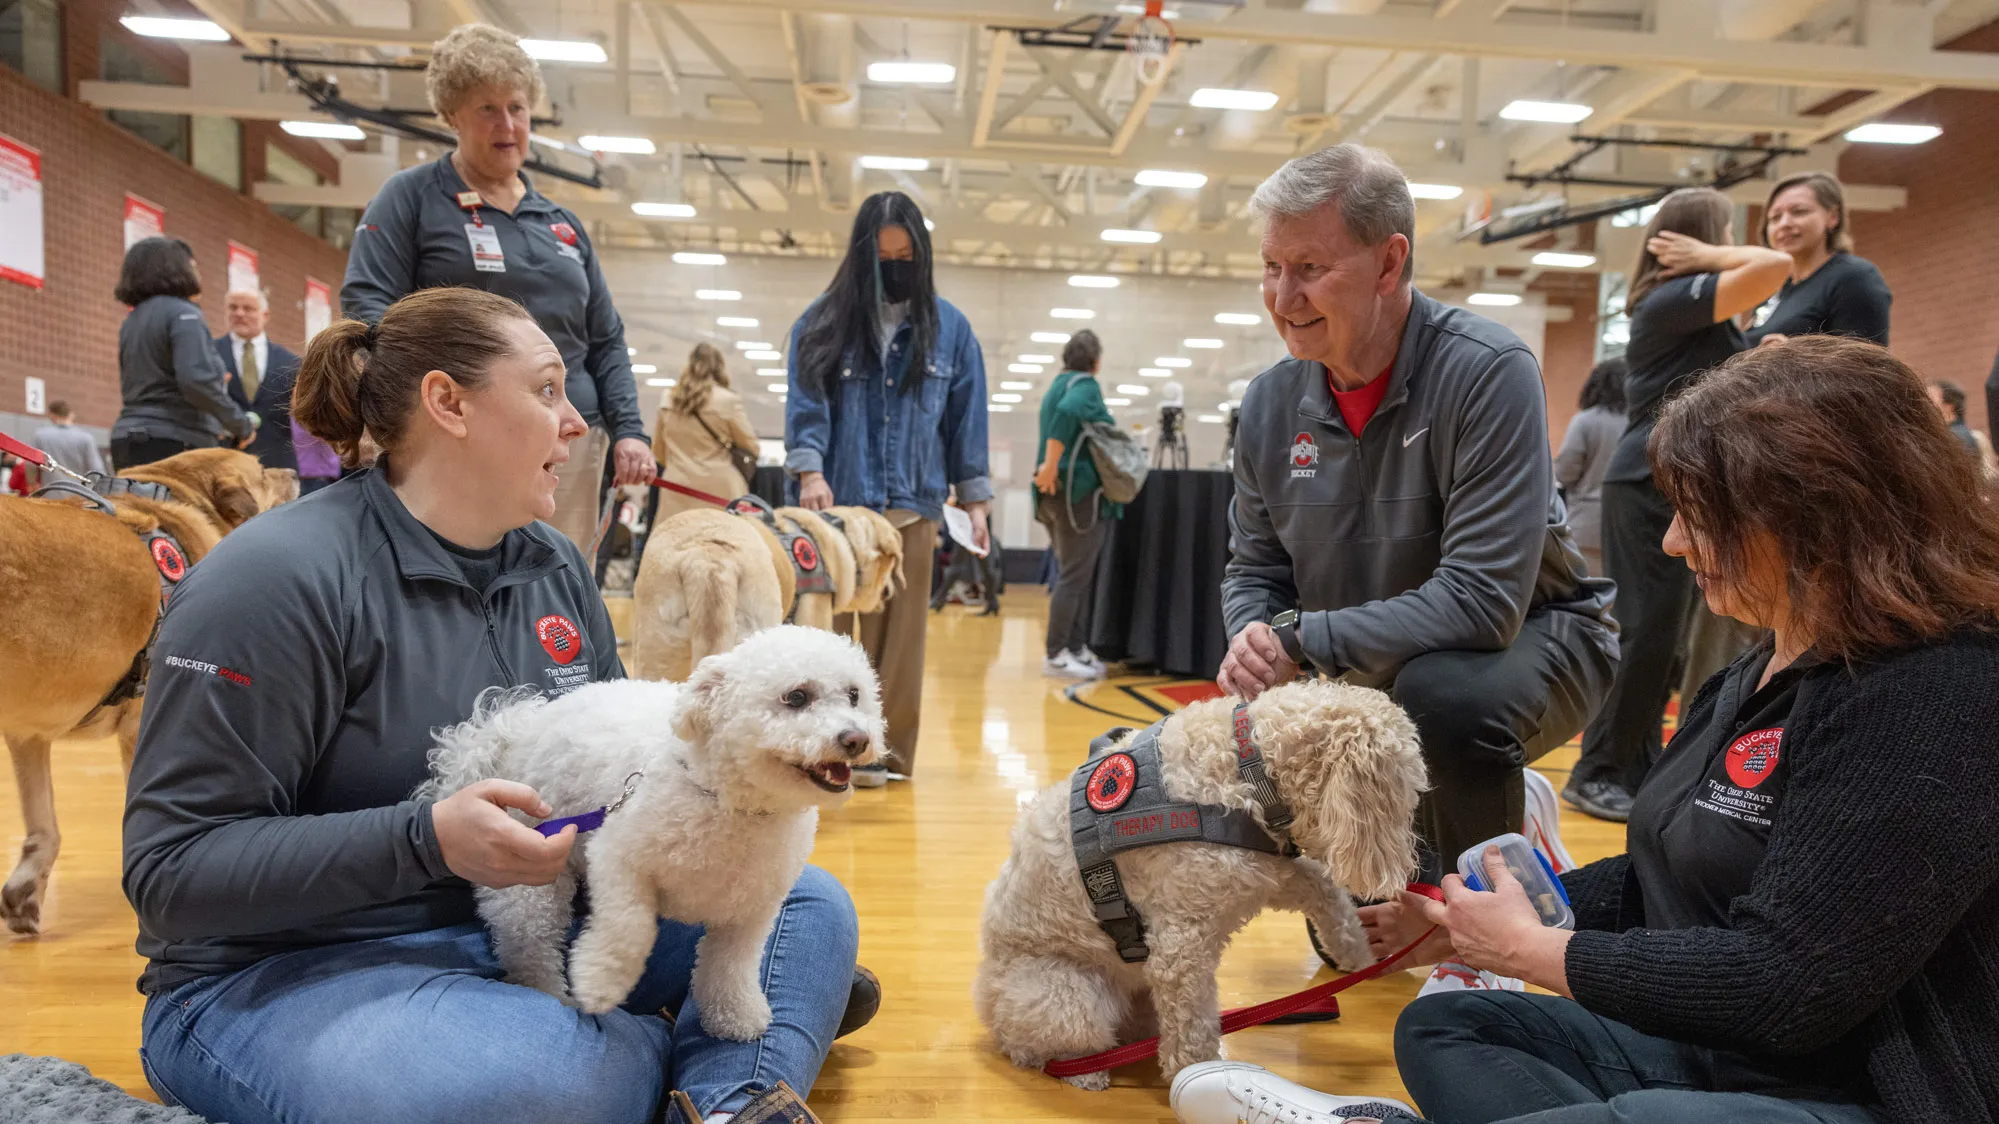 President Carter crouches on a gymnasium floor to talk with the owners of a pair of Buckeye Paws’ smaller dogs, both of which might be poodle mixes, judging by their fluffy, wavy fur. President Carter is chuckling as he makes eye contact with the woman talking, who is sitting on the floor and holding her dog on her lap. 